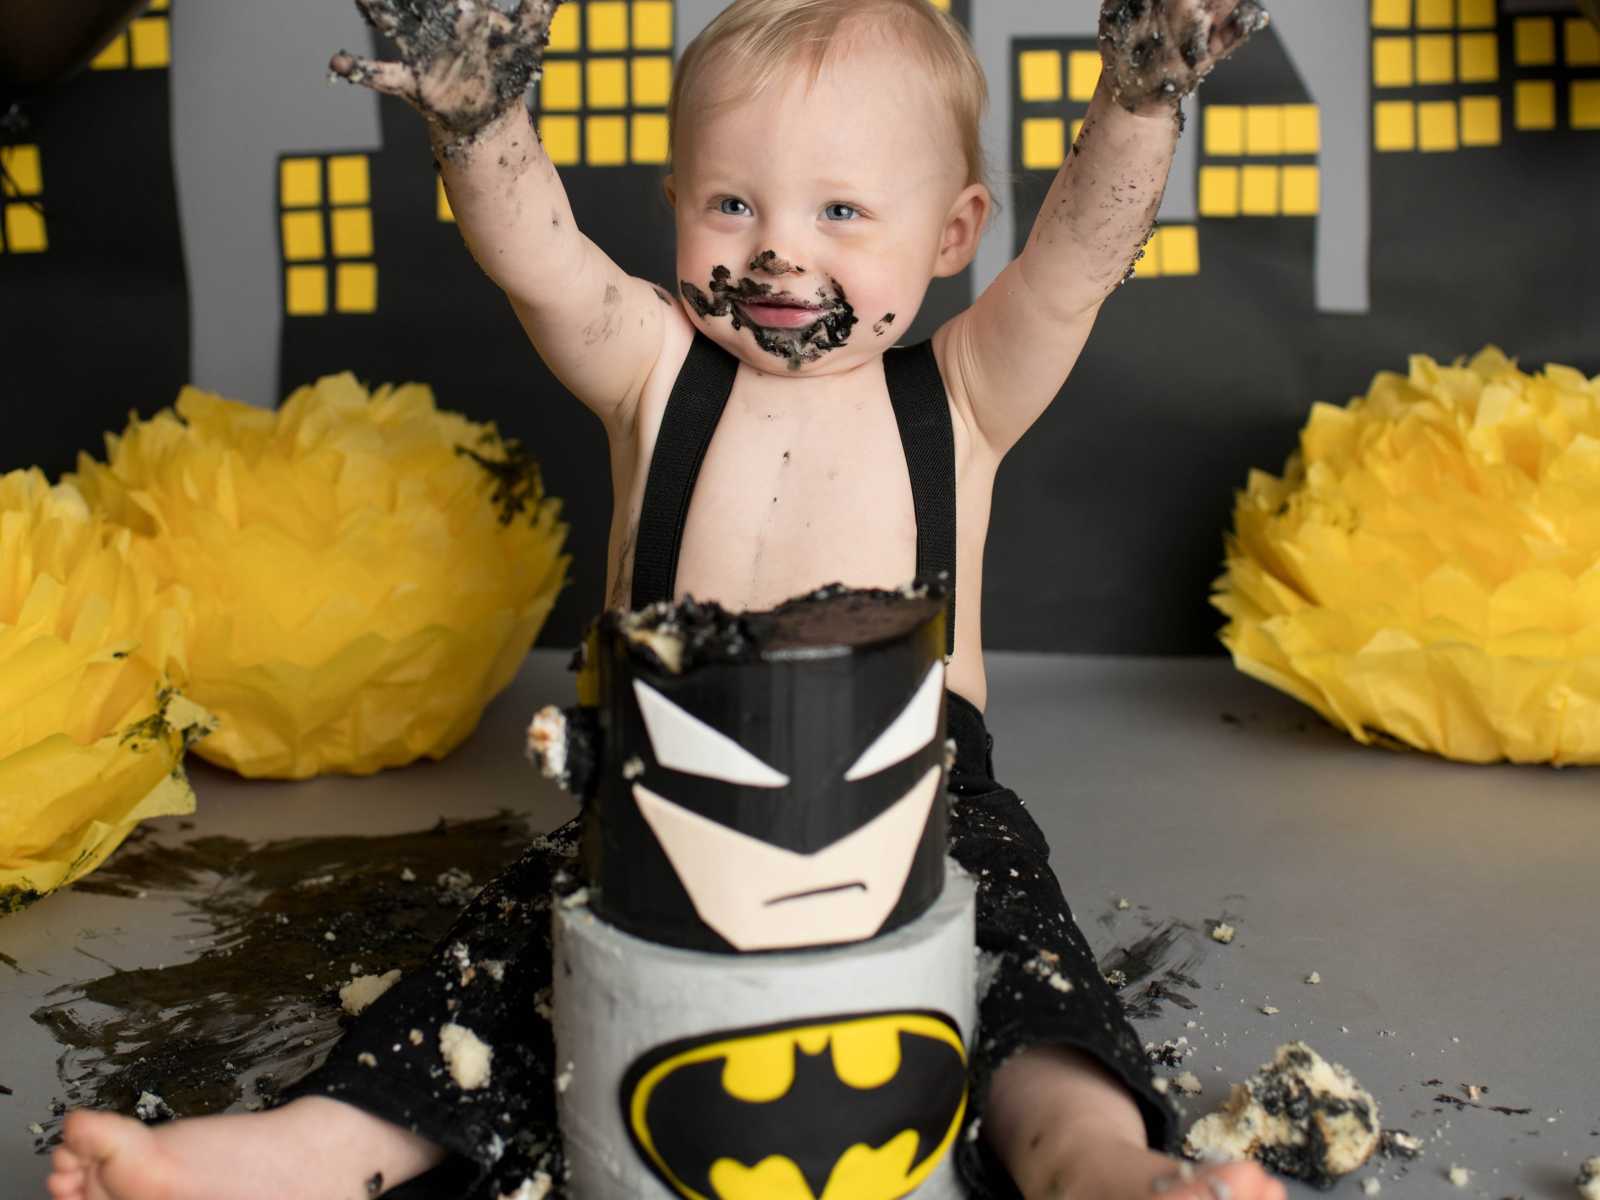 infant boy covered in black frosting raises hands in the air with batman themed cake in front of him